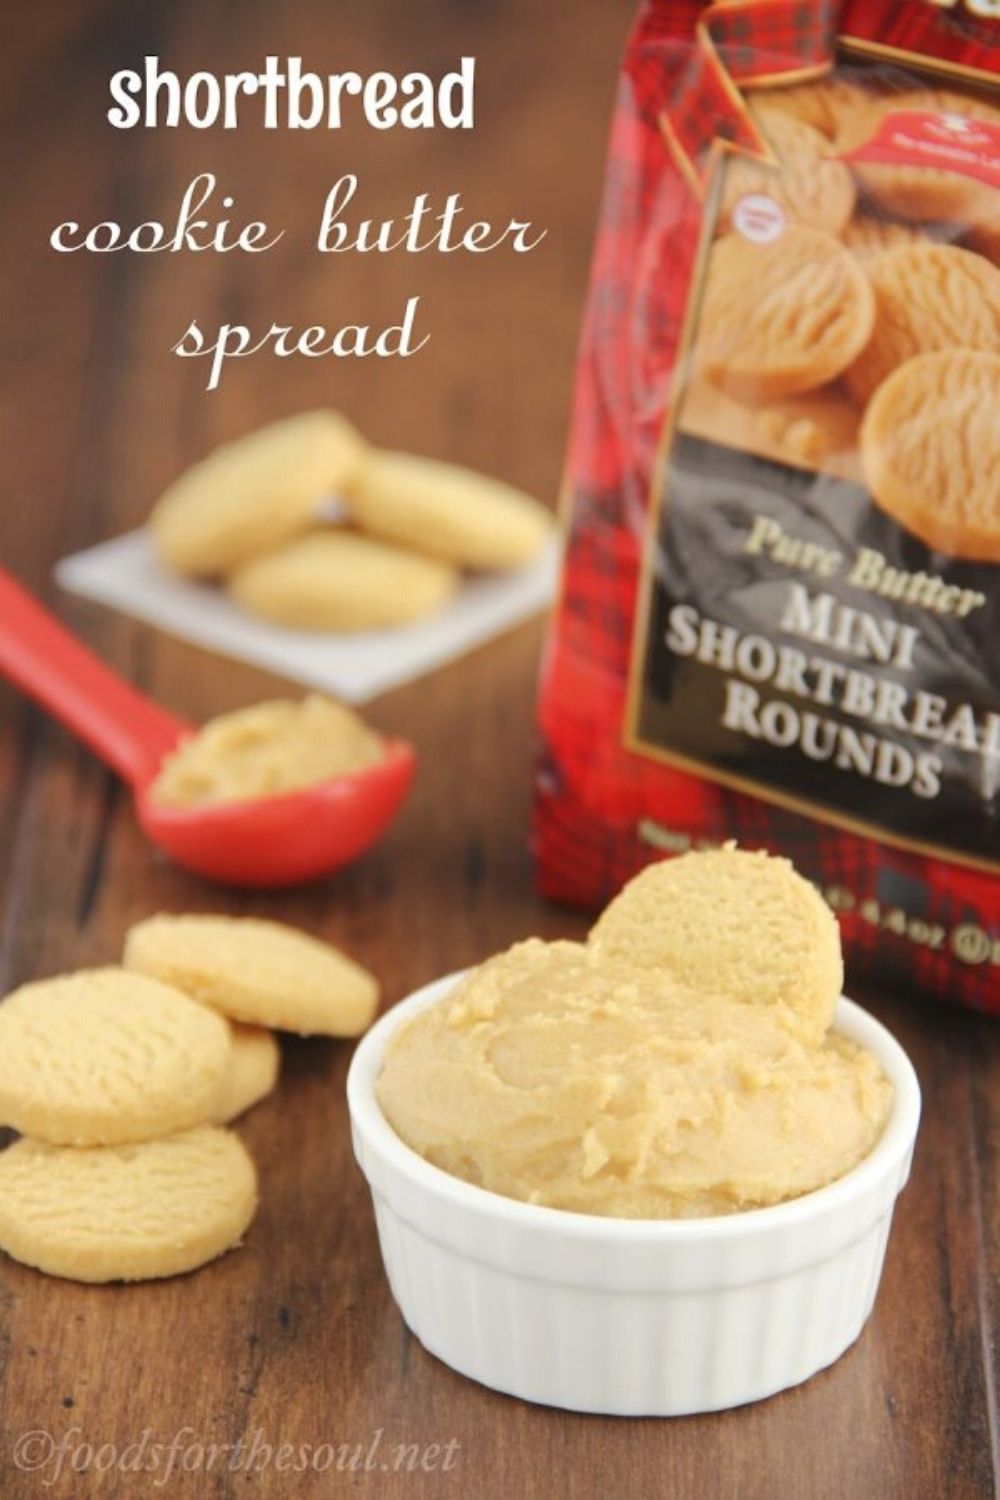 Shortbread Cookie Butter by Amy’s Healthy Baking.